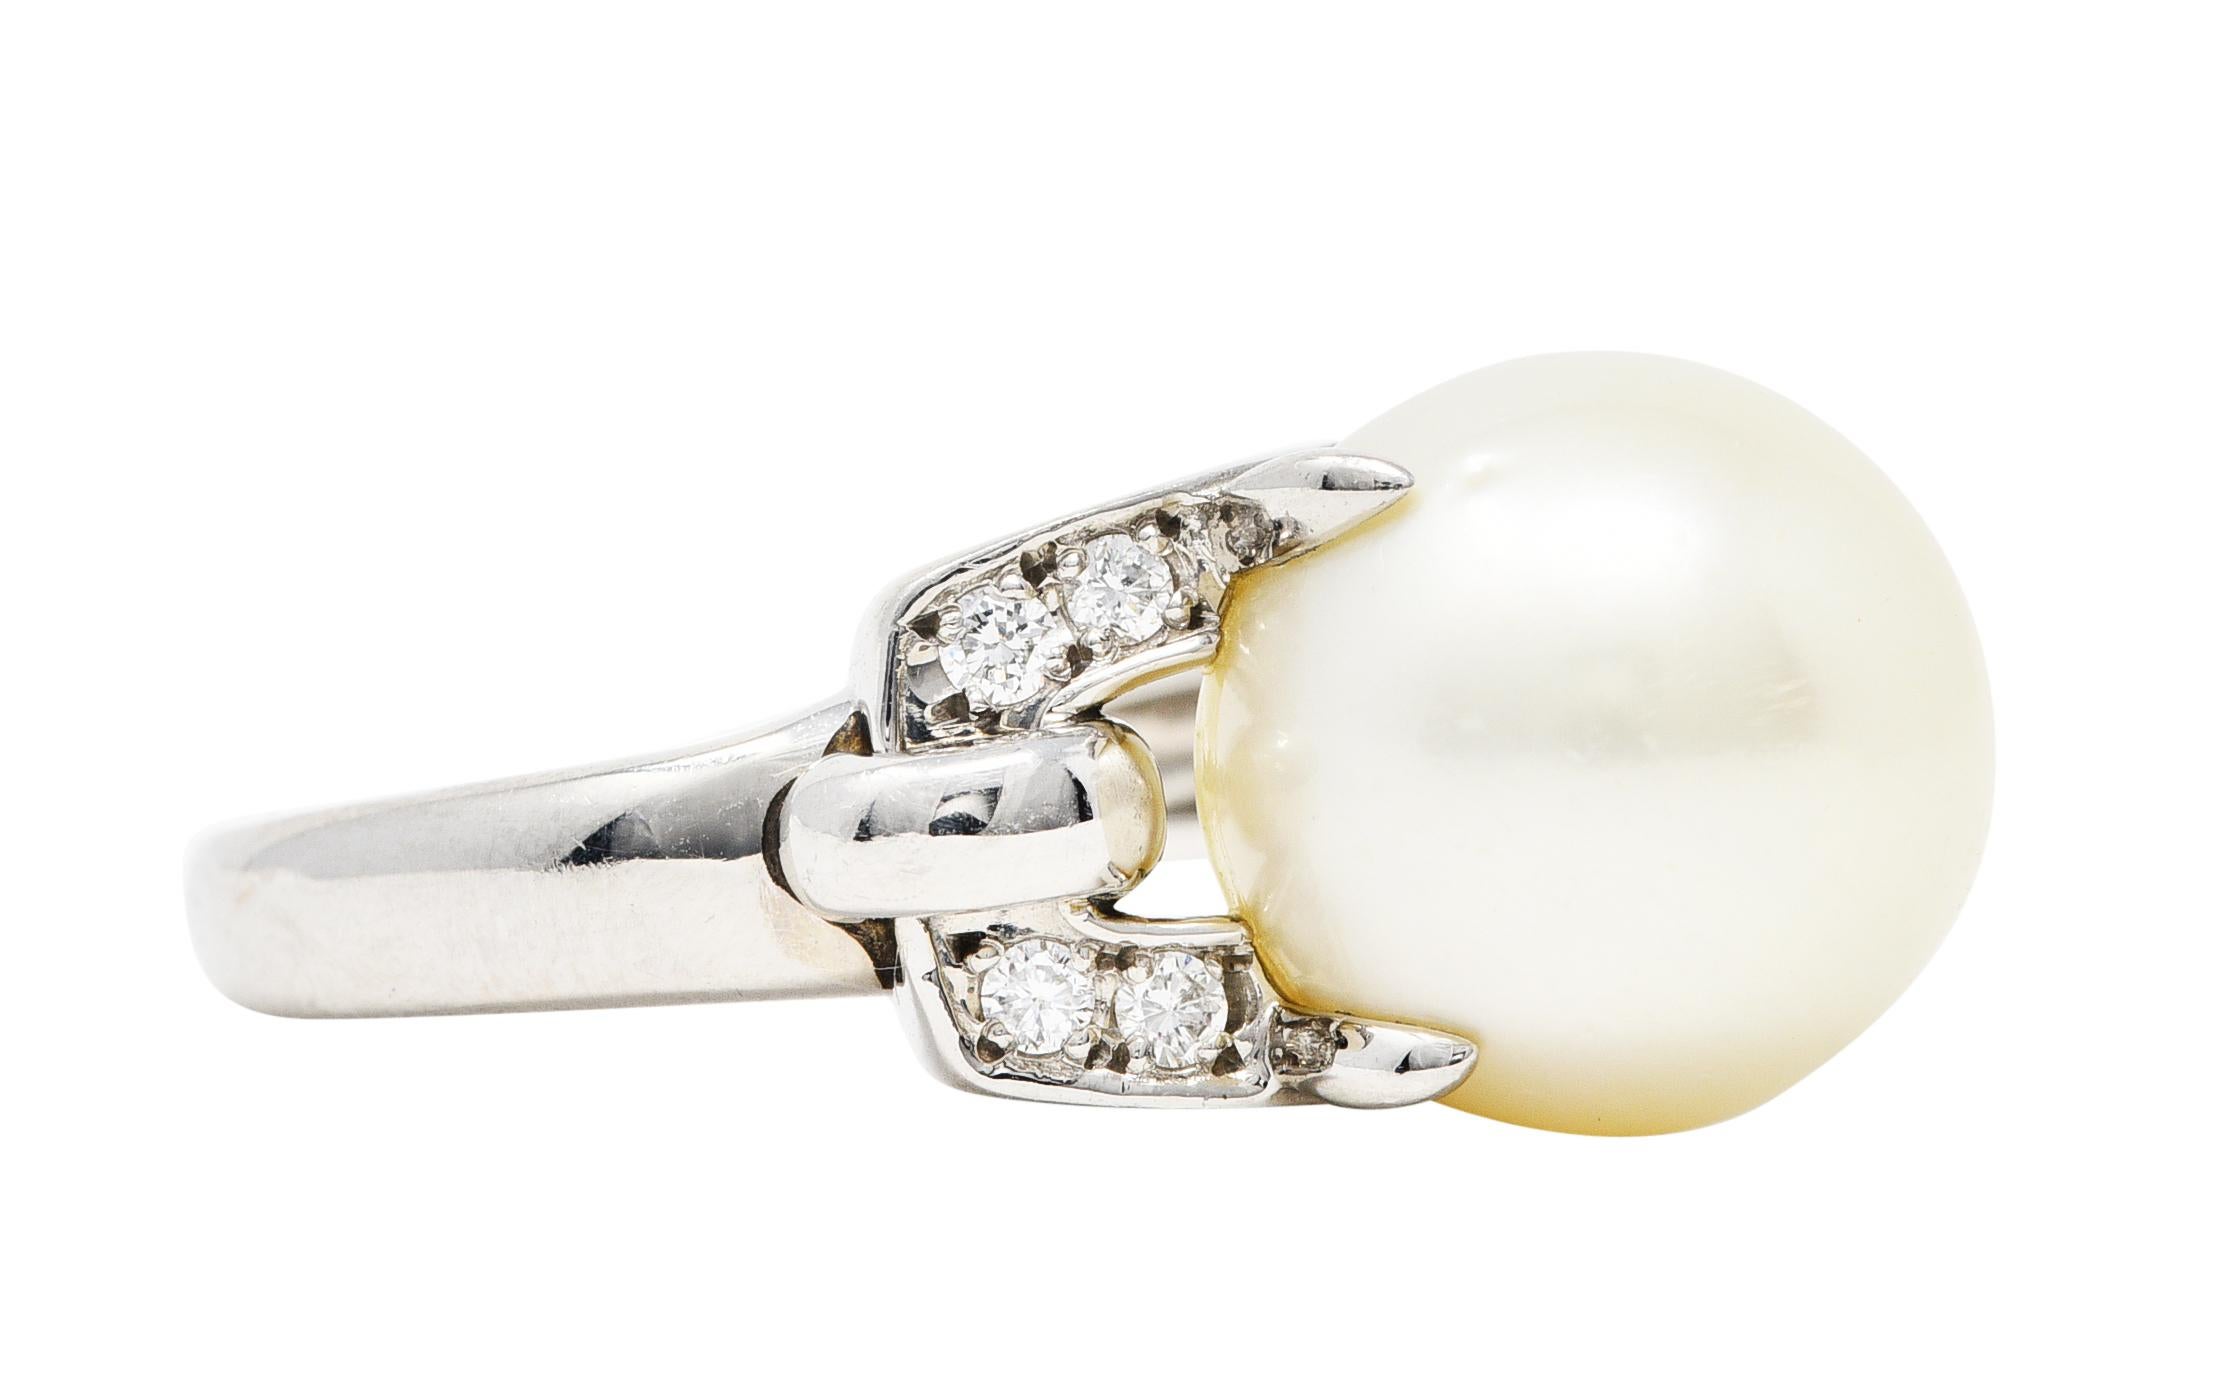 Cocktail style ring designed with high polish and buckle motif

Centering a prong set 12.0 mm round pearl - white in body color with good luster

Flanked by buckle motif shoulders each accented by four round cut diamonds

Diamonds weigh